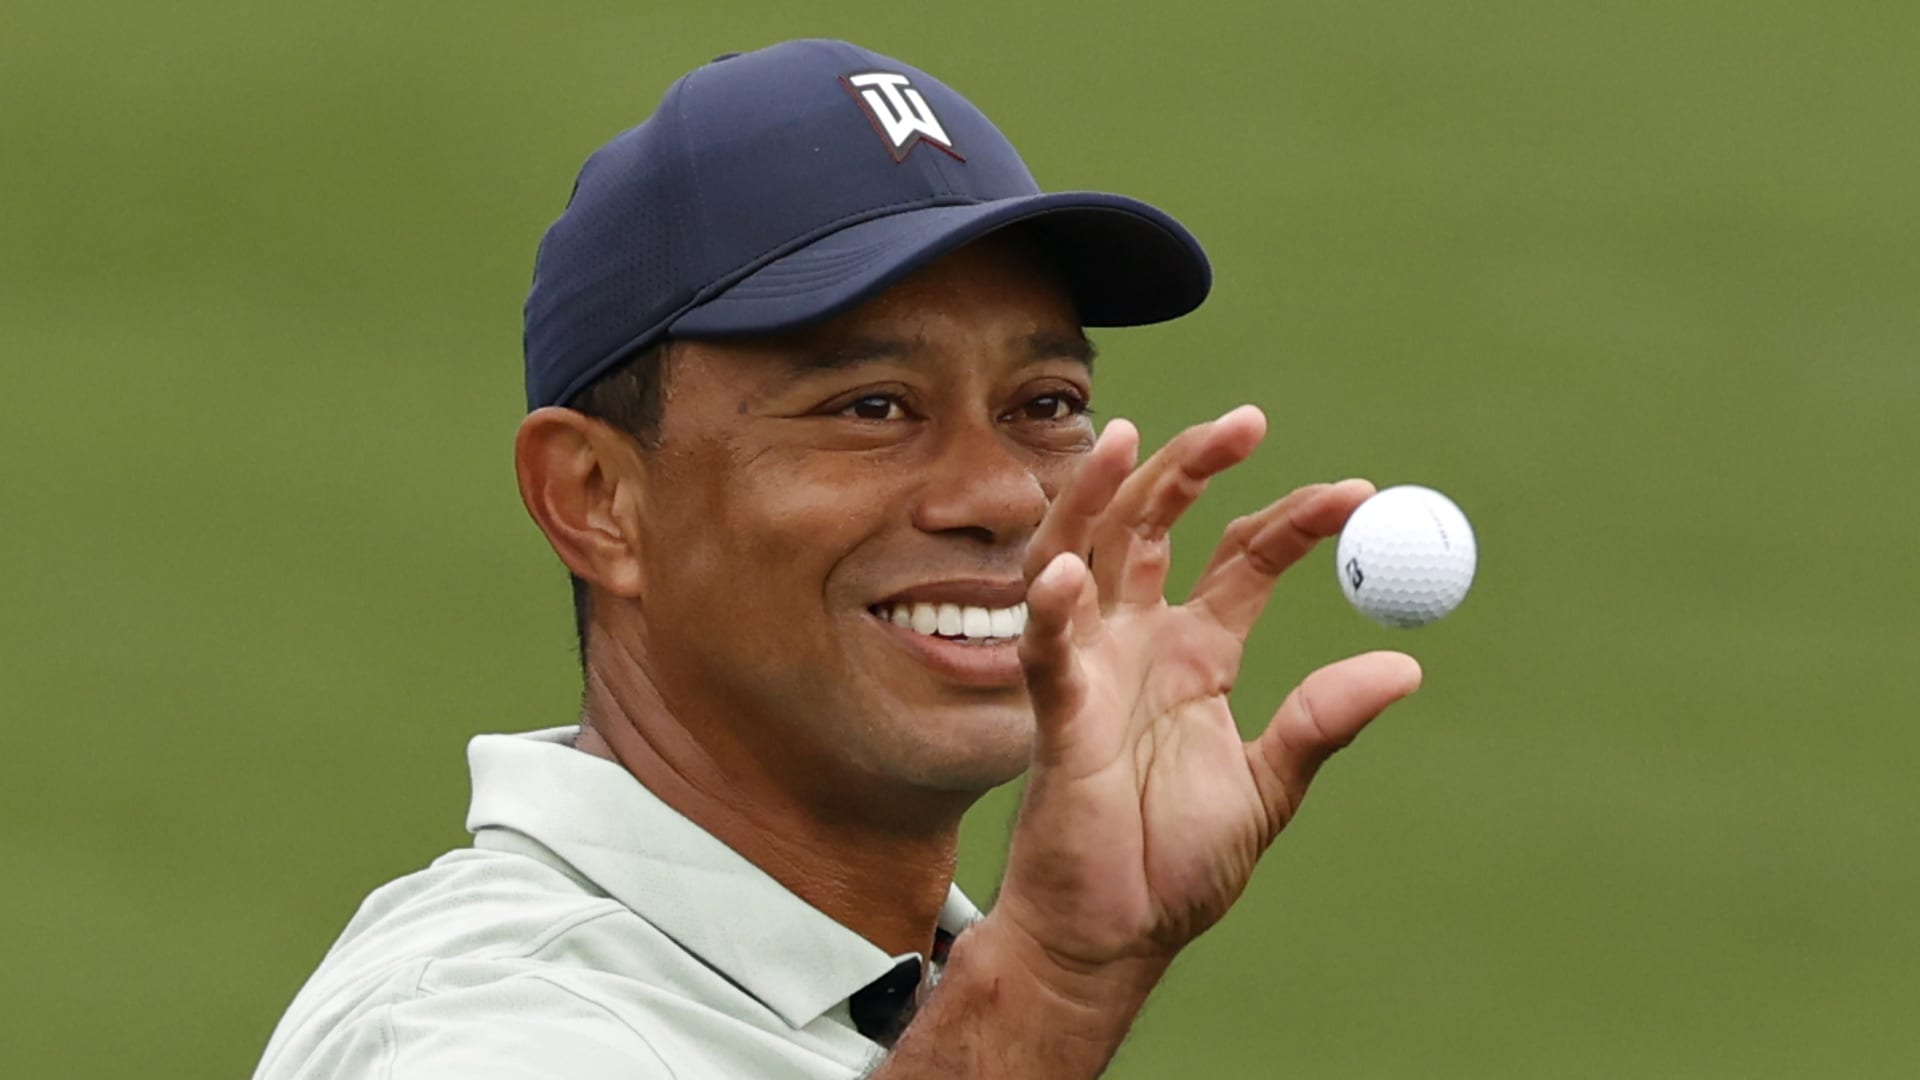  Following his split from Nike, Tiger Woods signs apparel and footwear deal with TaylorMade. - CNBC (Picture 1)